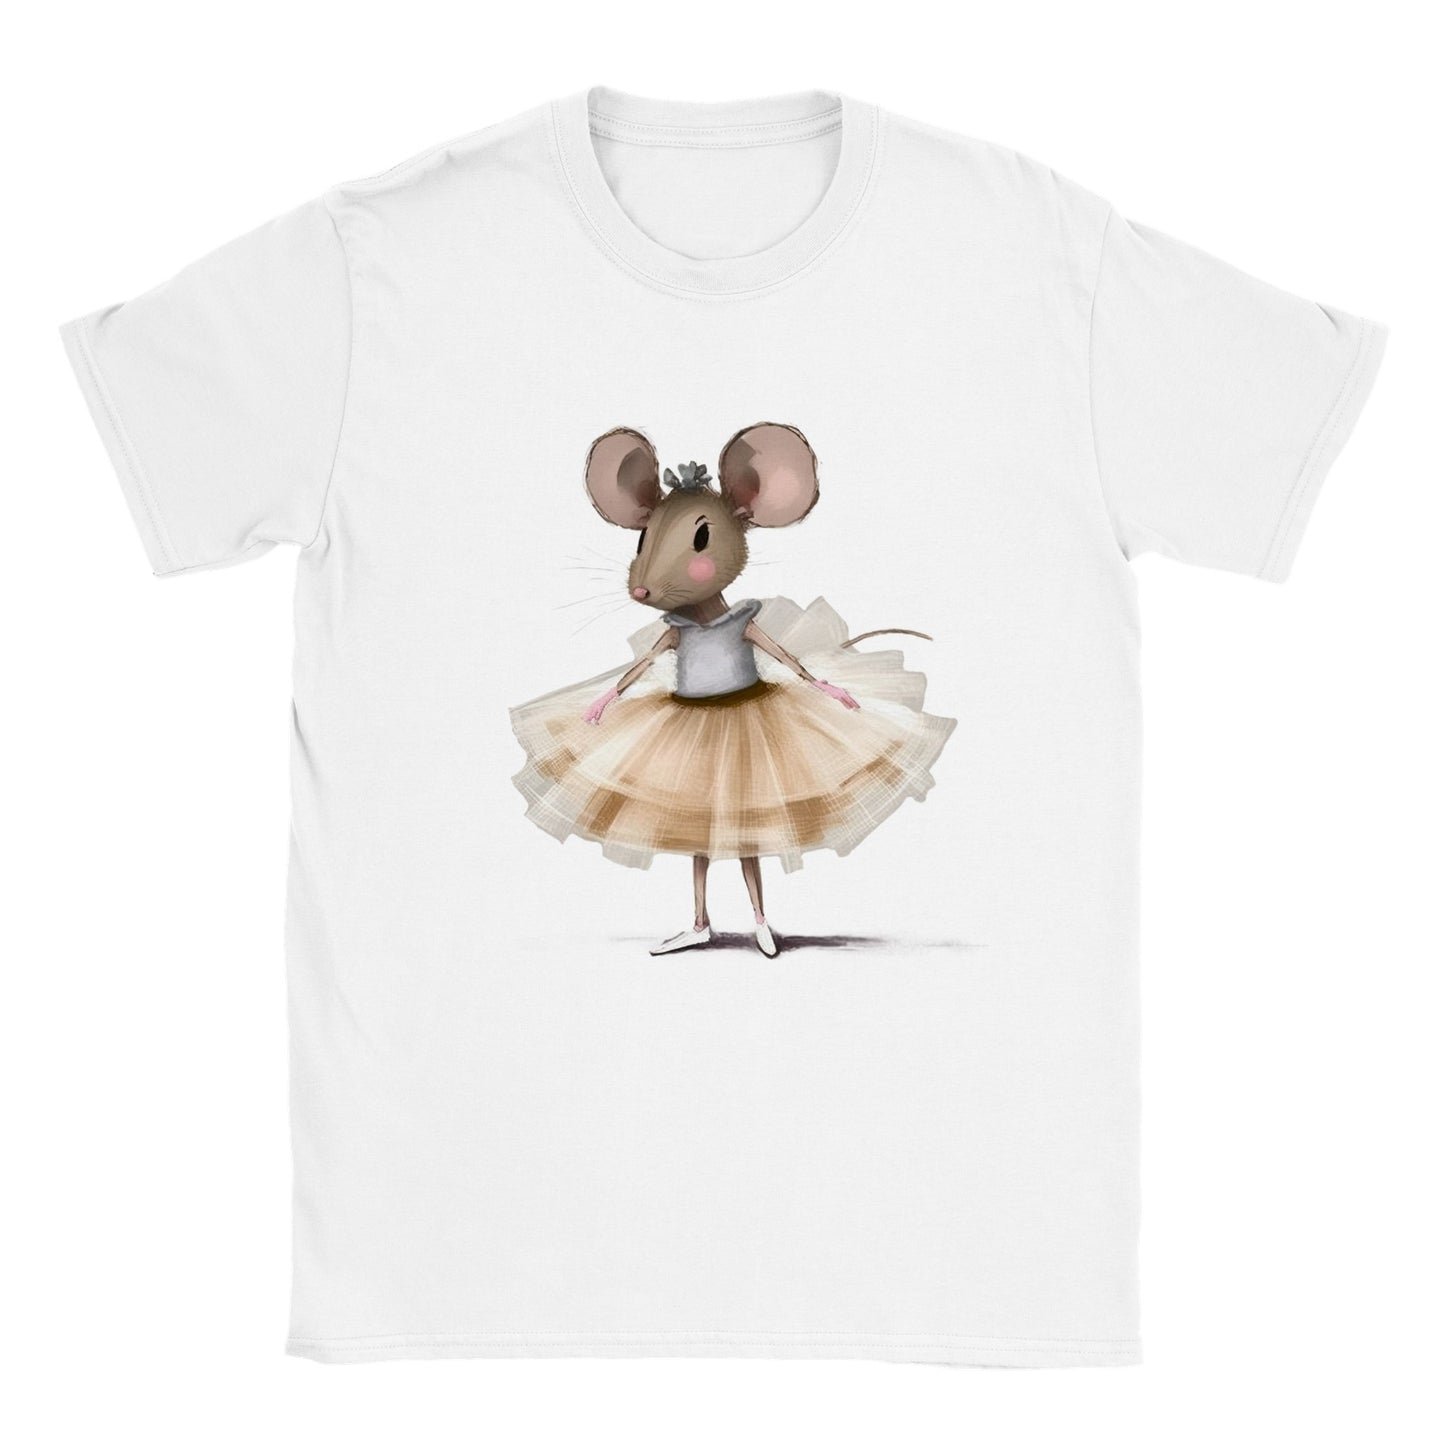 Kids white t-shirt with a cute ballerina mouse print